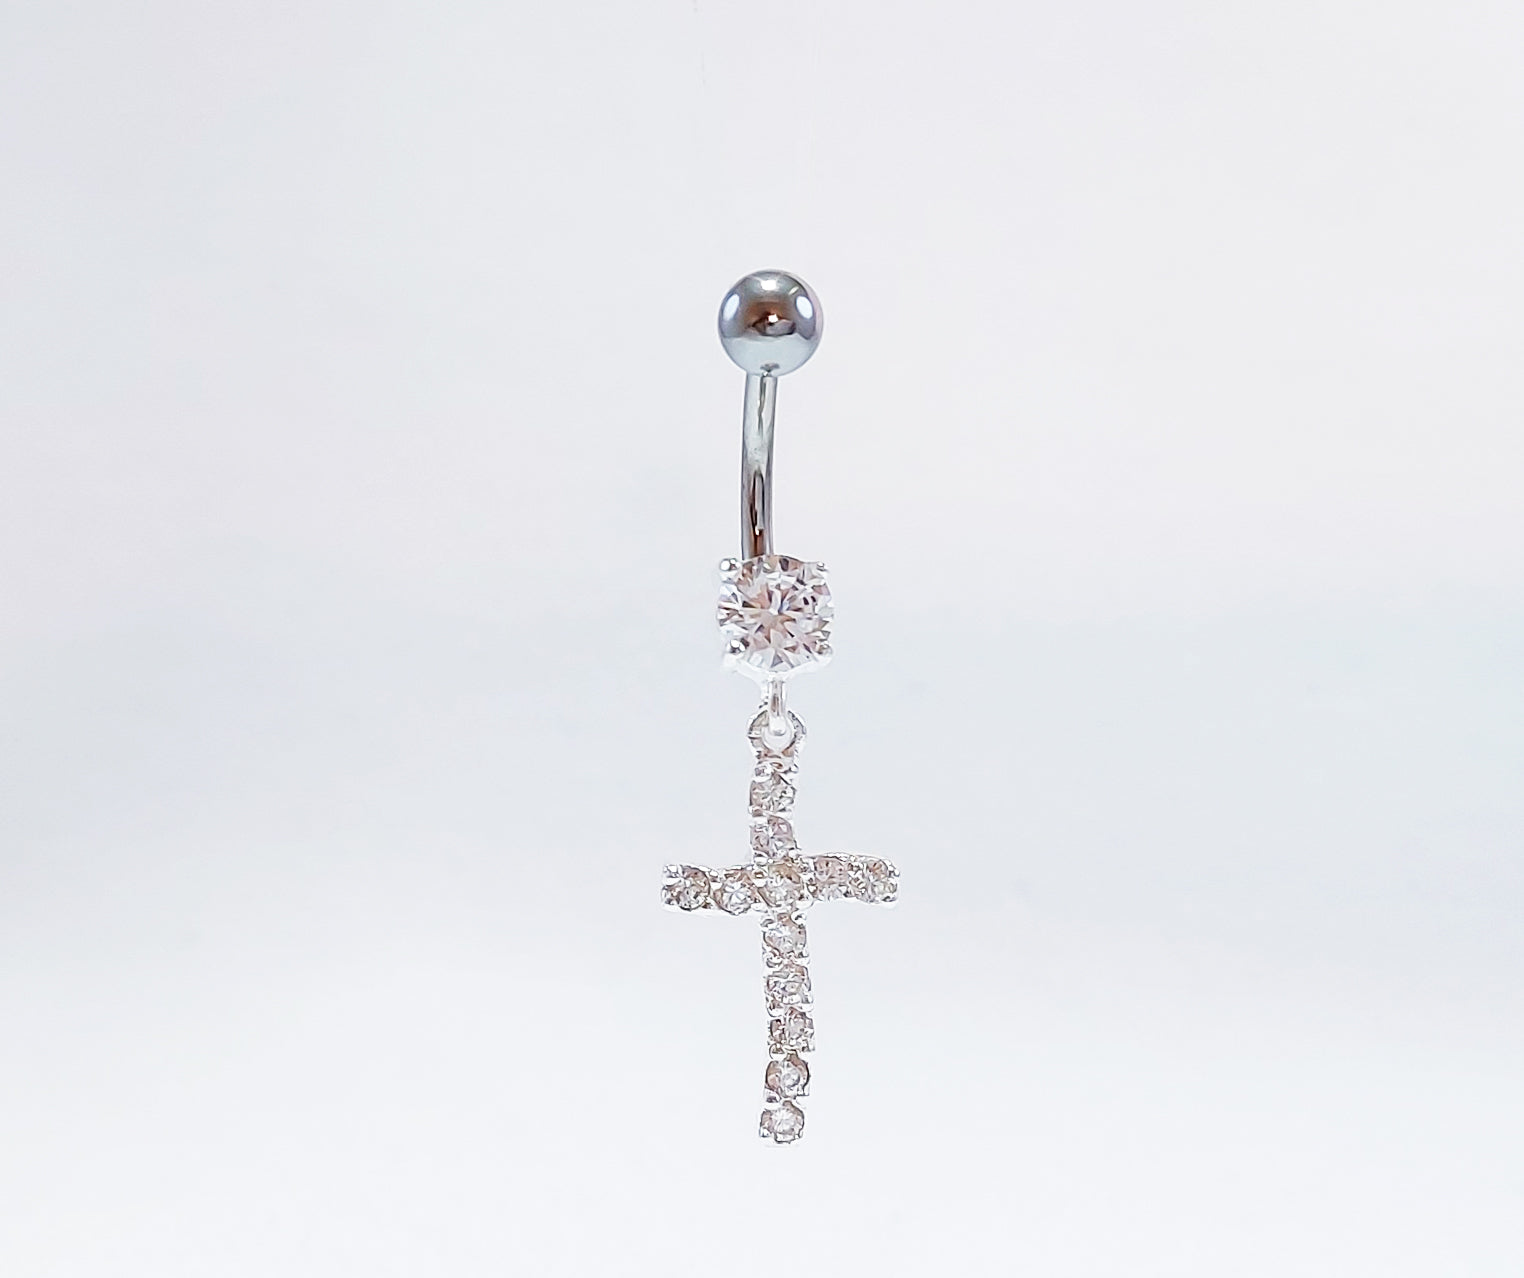 Sterling Silver Belly Ring with Cubic Zirconia Stones.  Cross Design